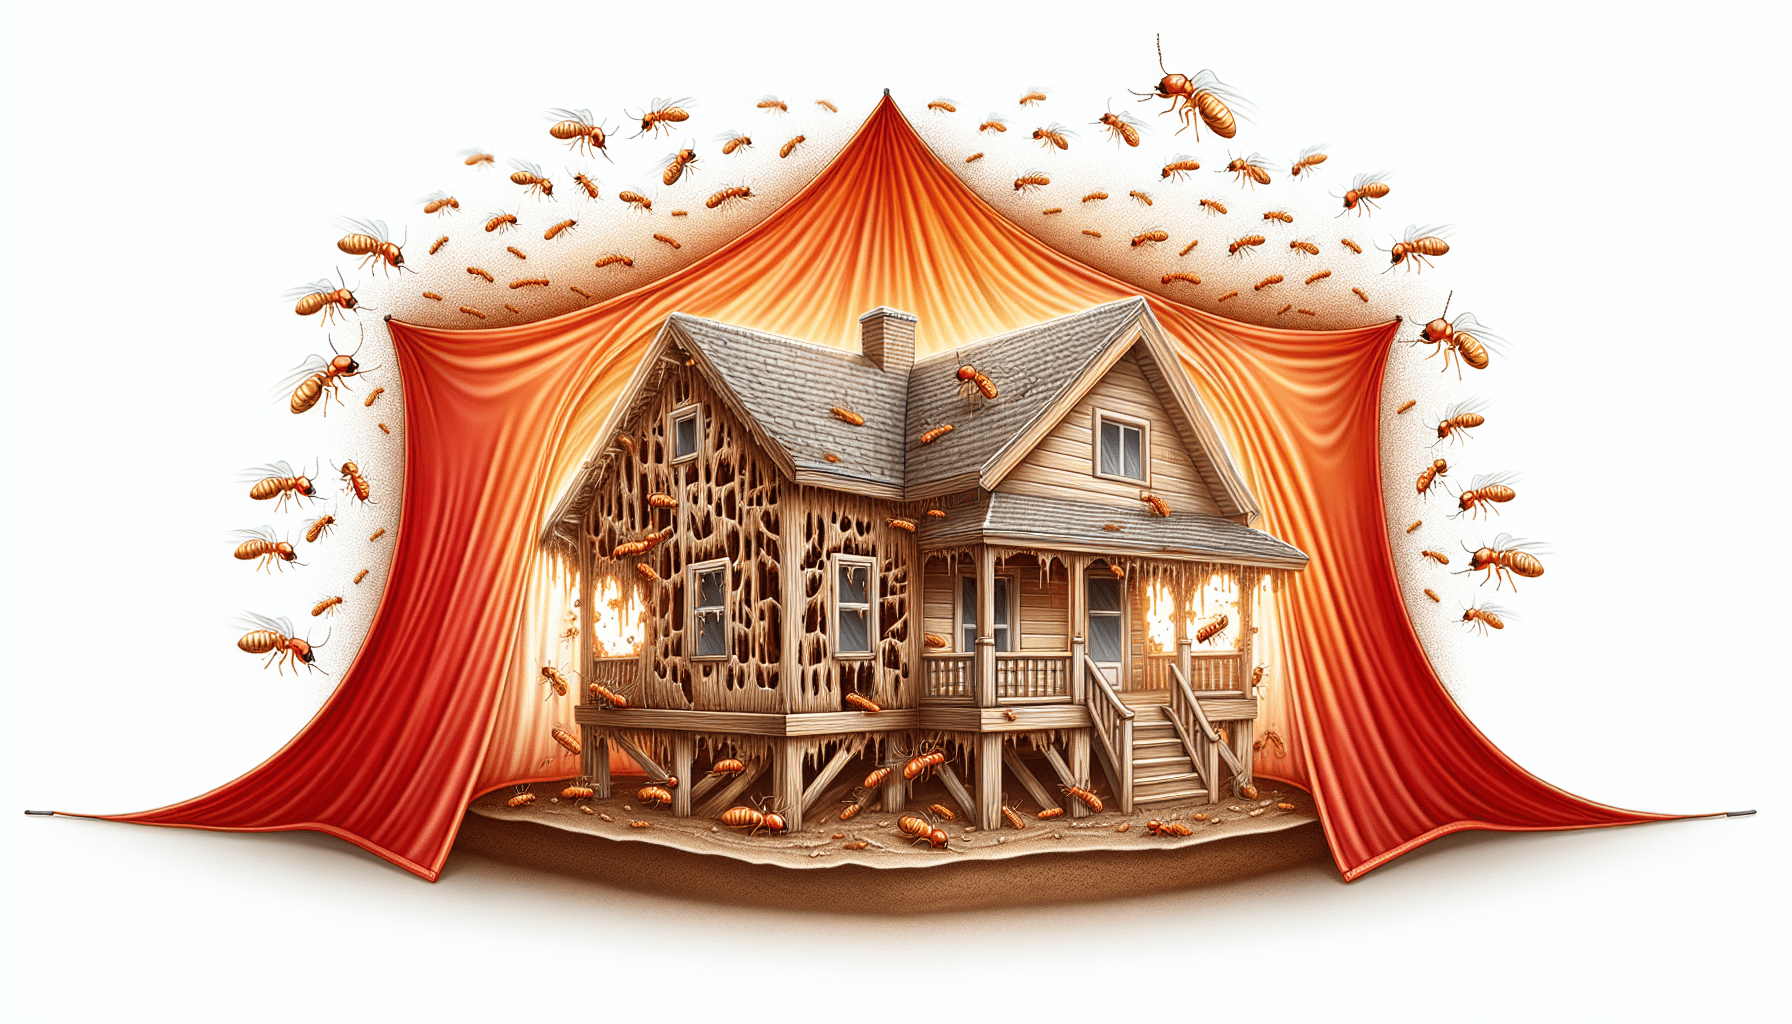 Illustration of severe termite infestations in a house